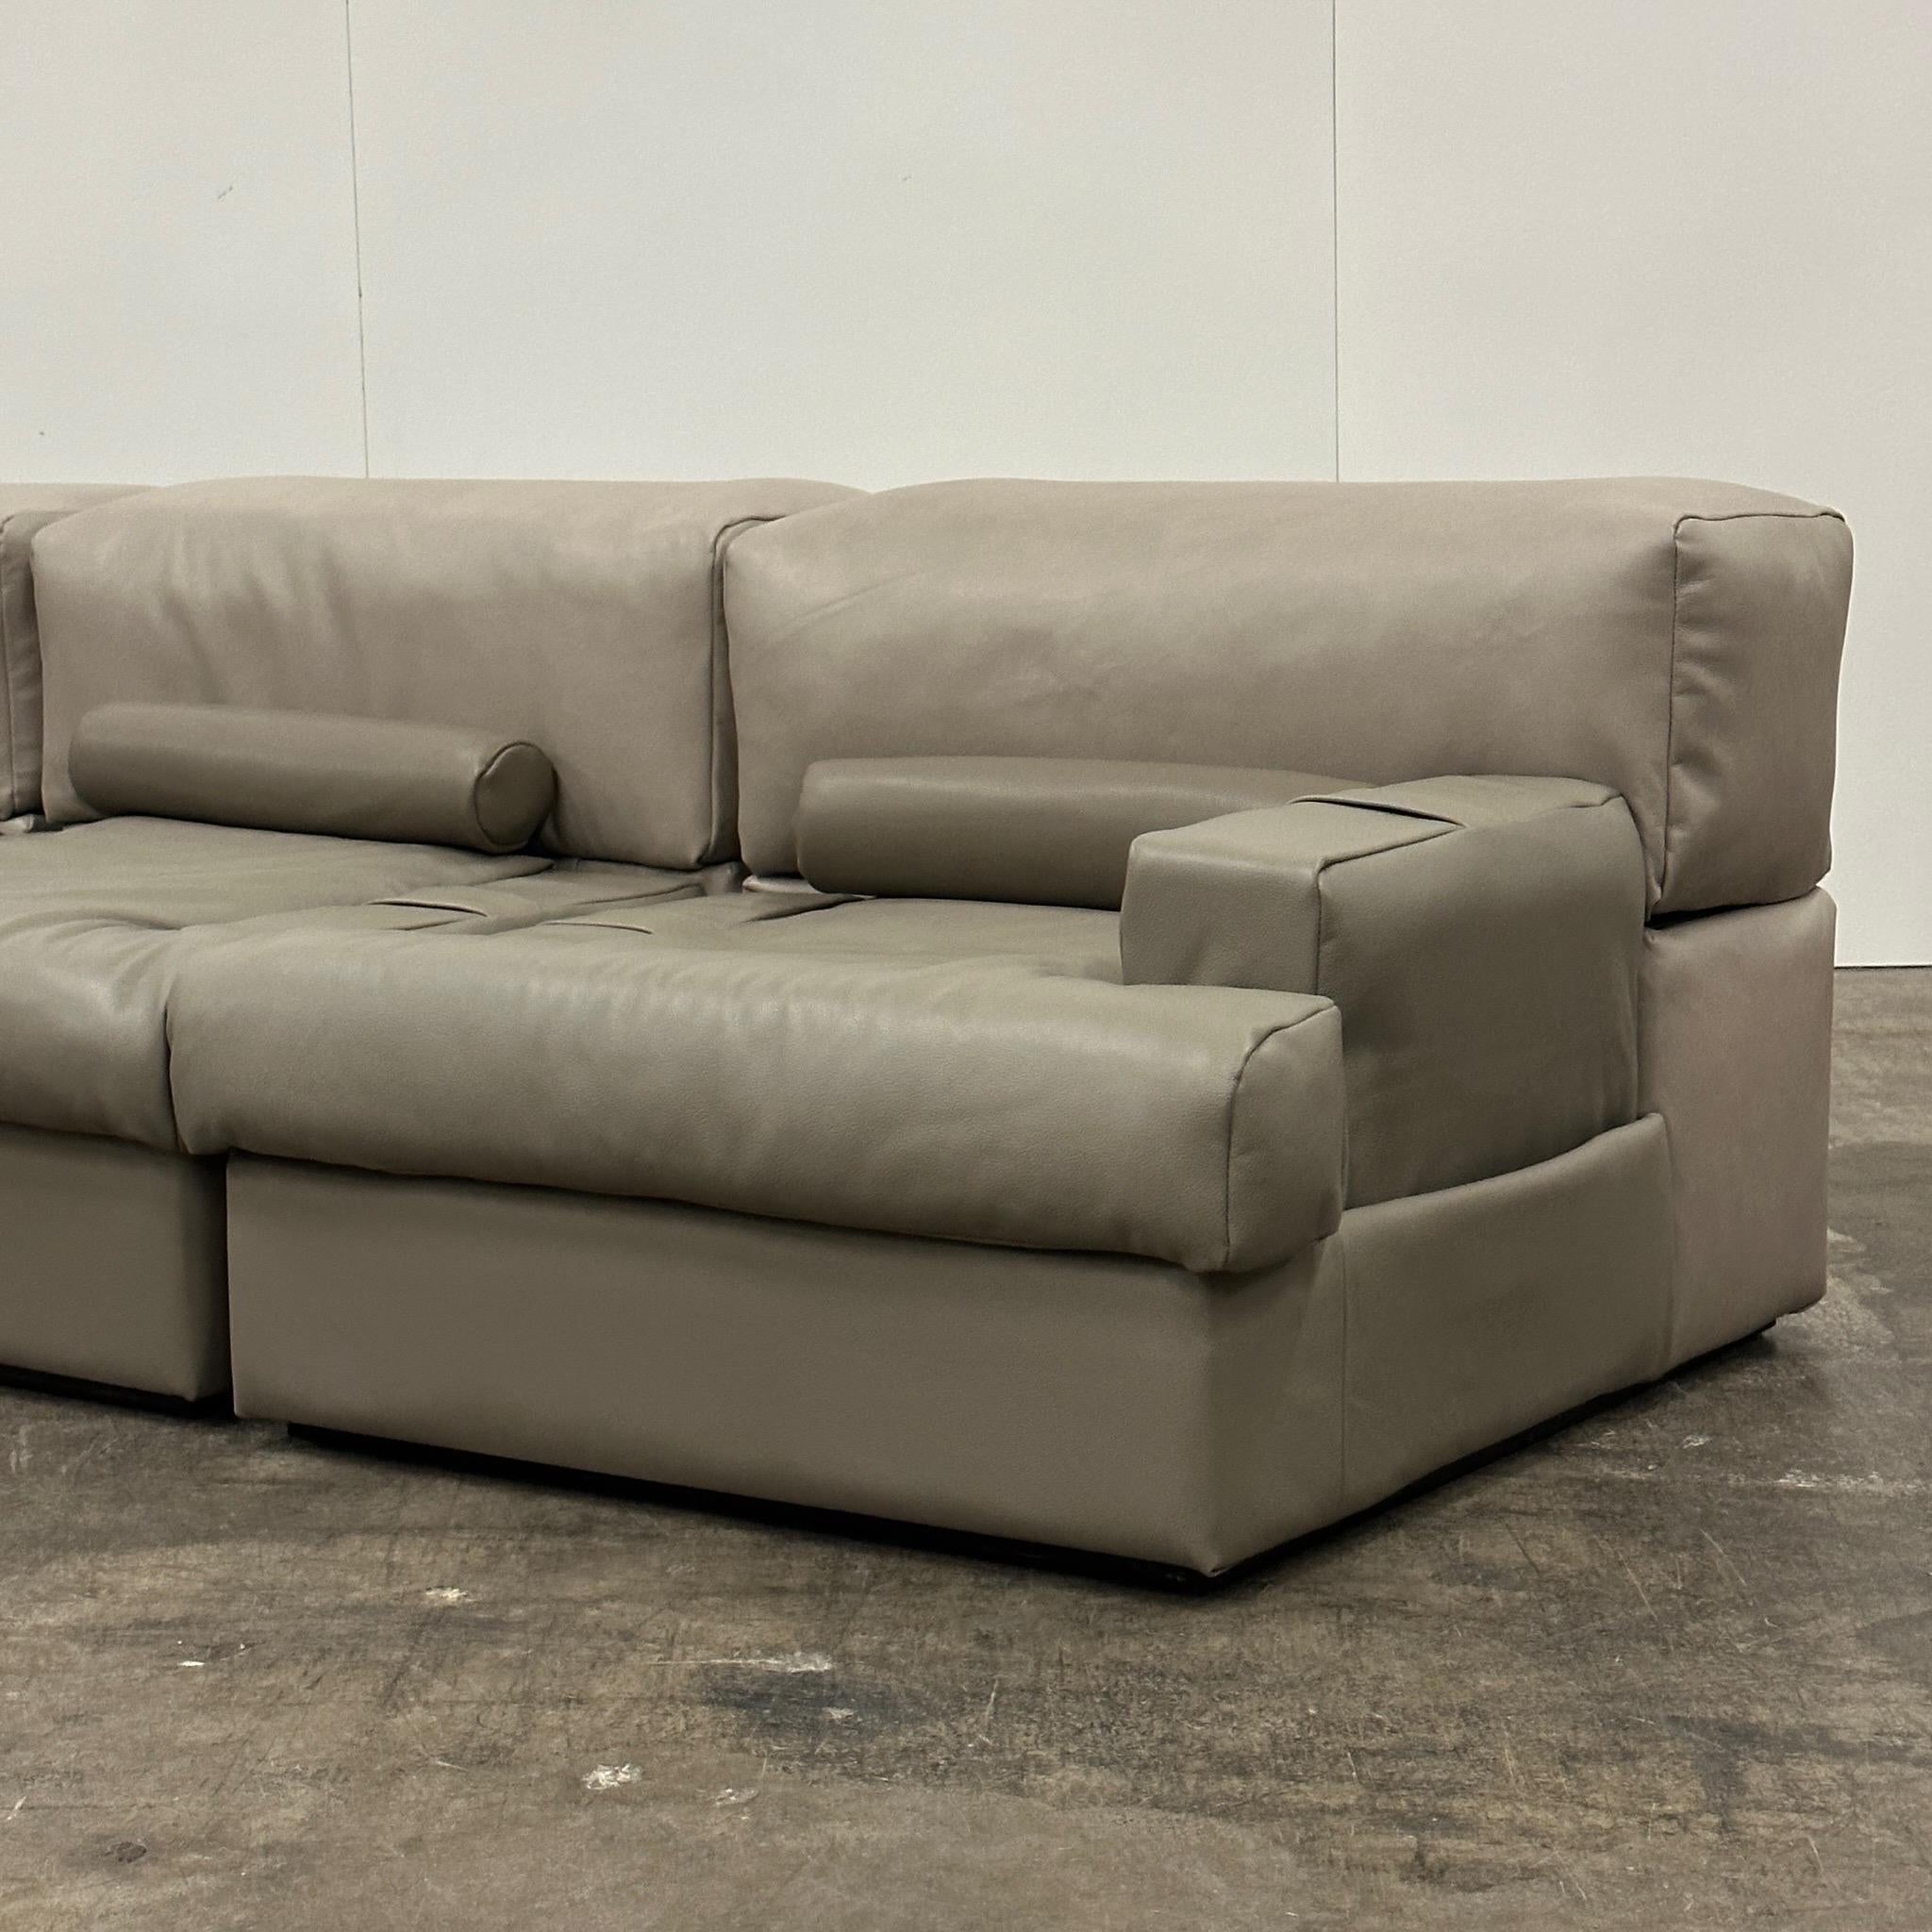 Brazilian Modular Leather Sofa/Chairs by Percival Lafer In Good Condition For Sale In Chicago, IL